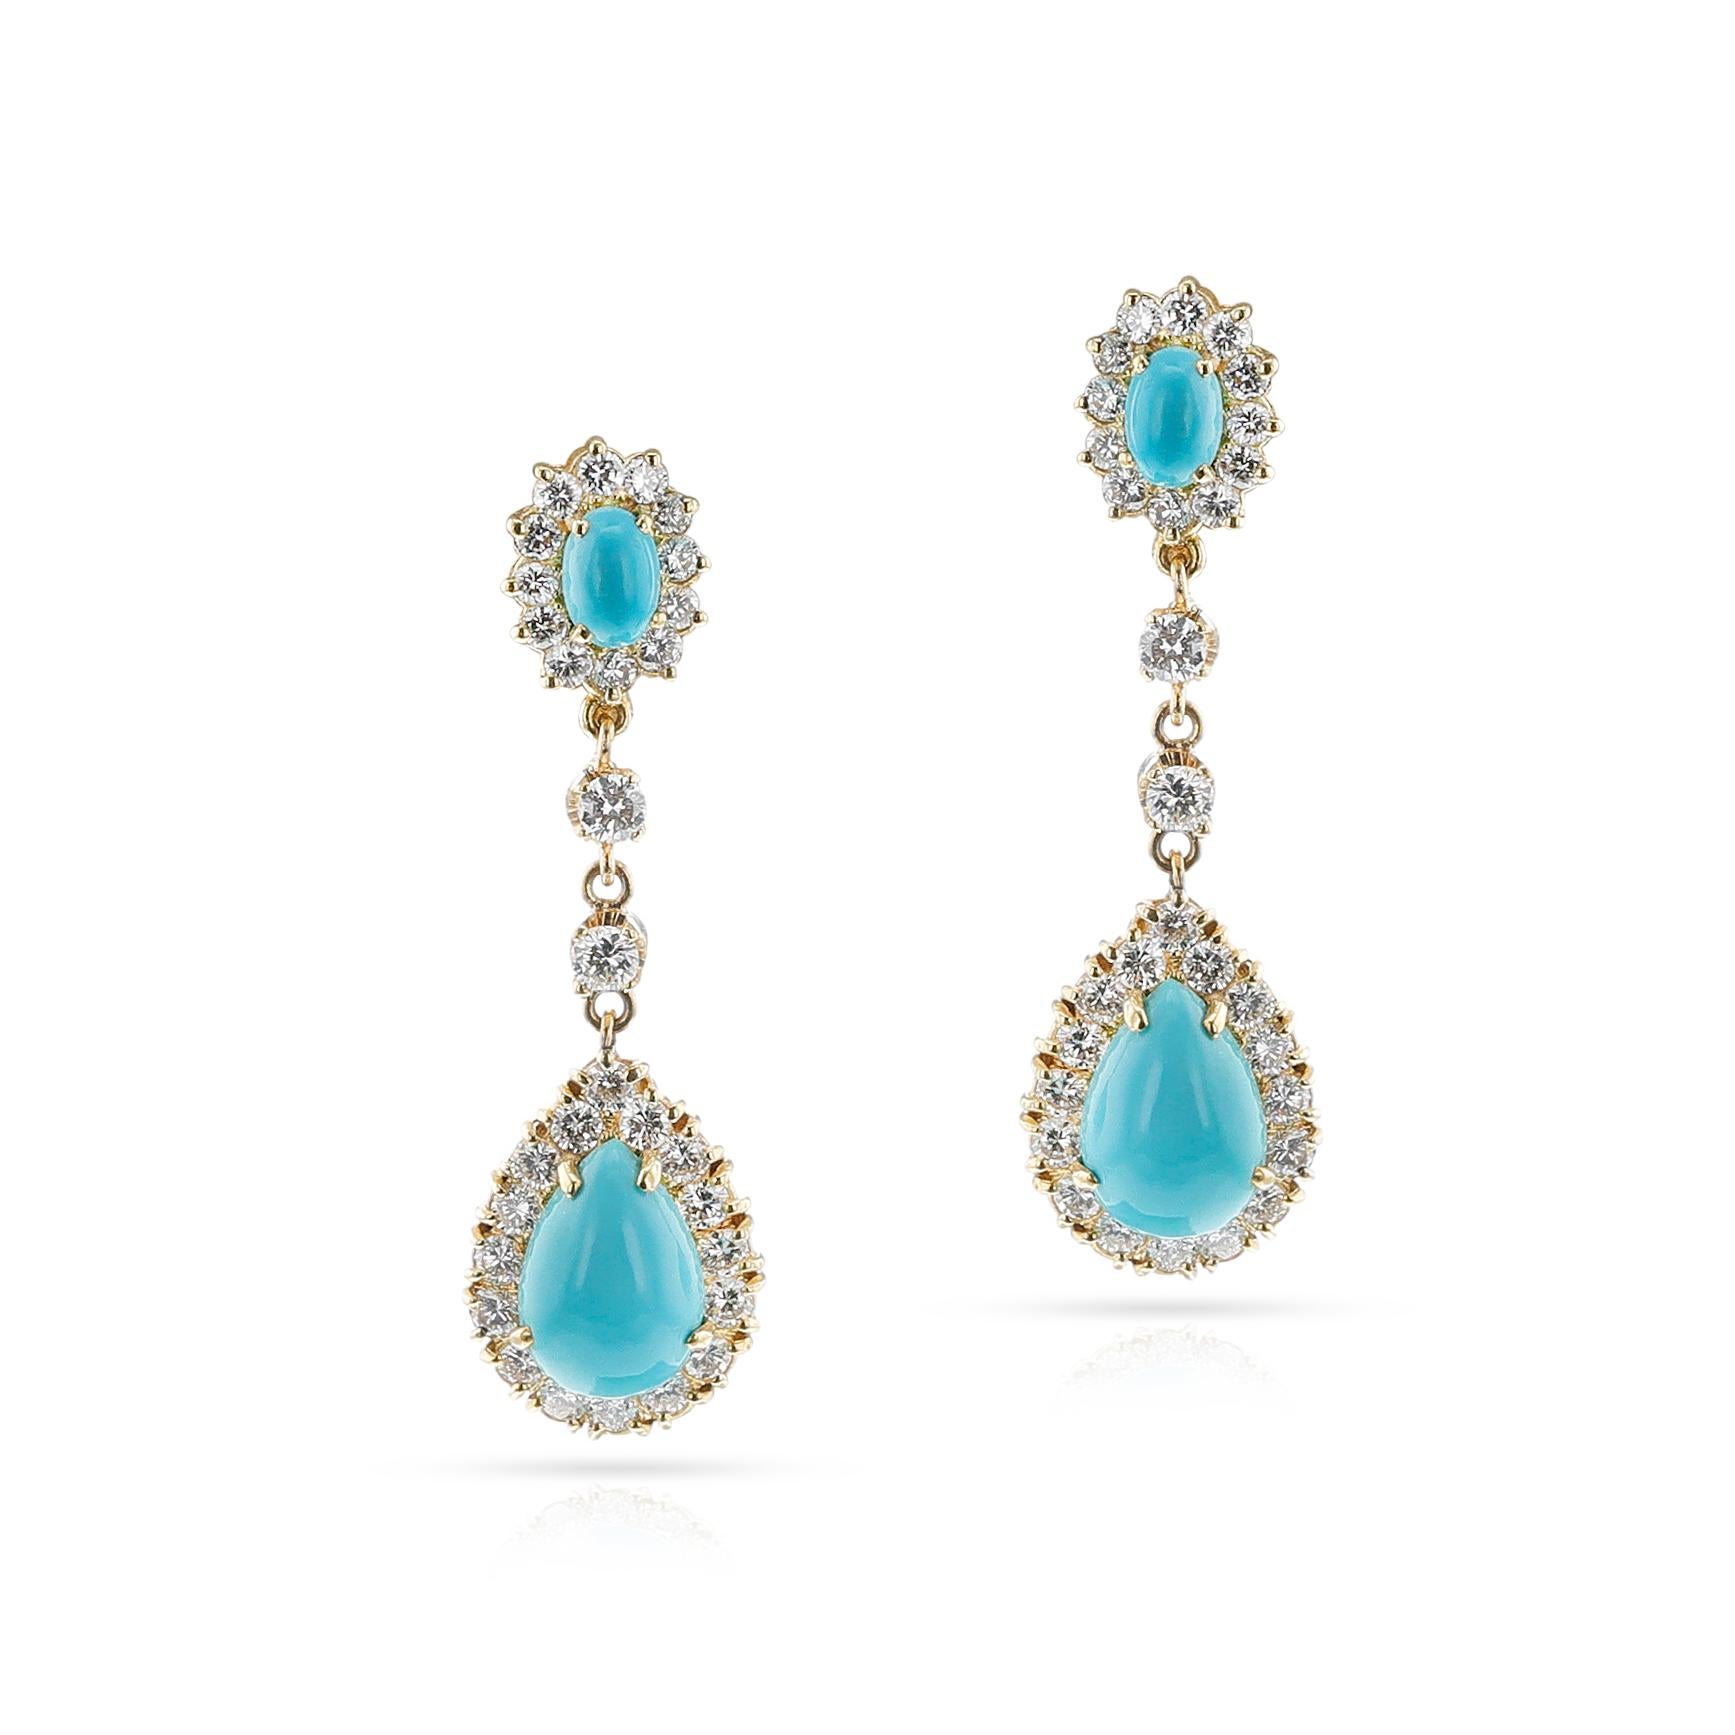 Turquoise Cabochon and Diamond Dangling Earrings, 18k In Excellent Condition For Sale In New York, NY